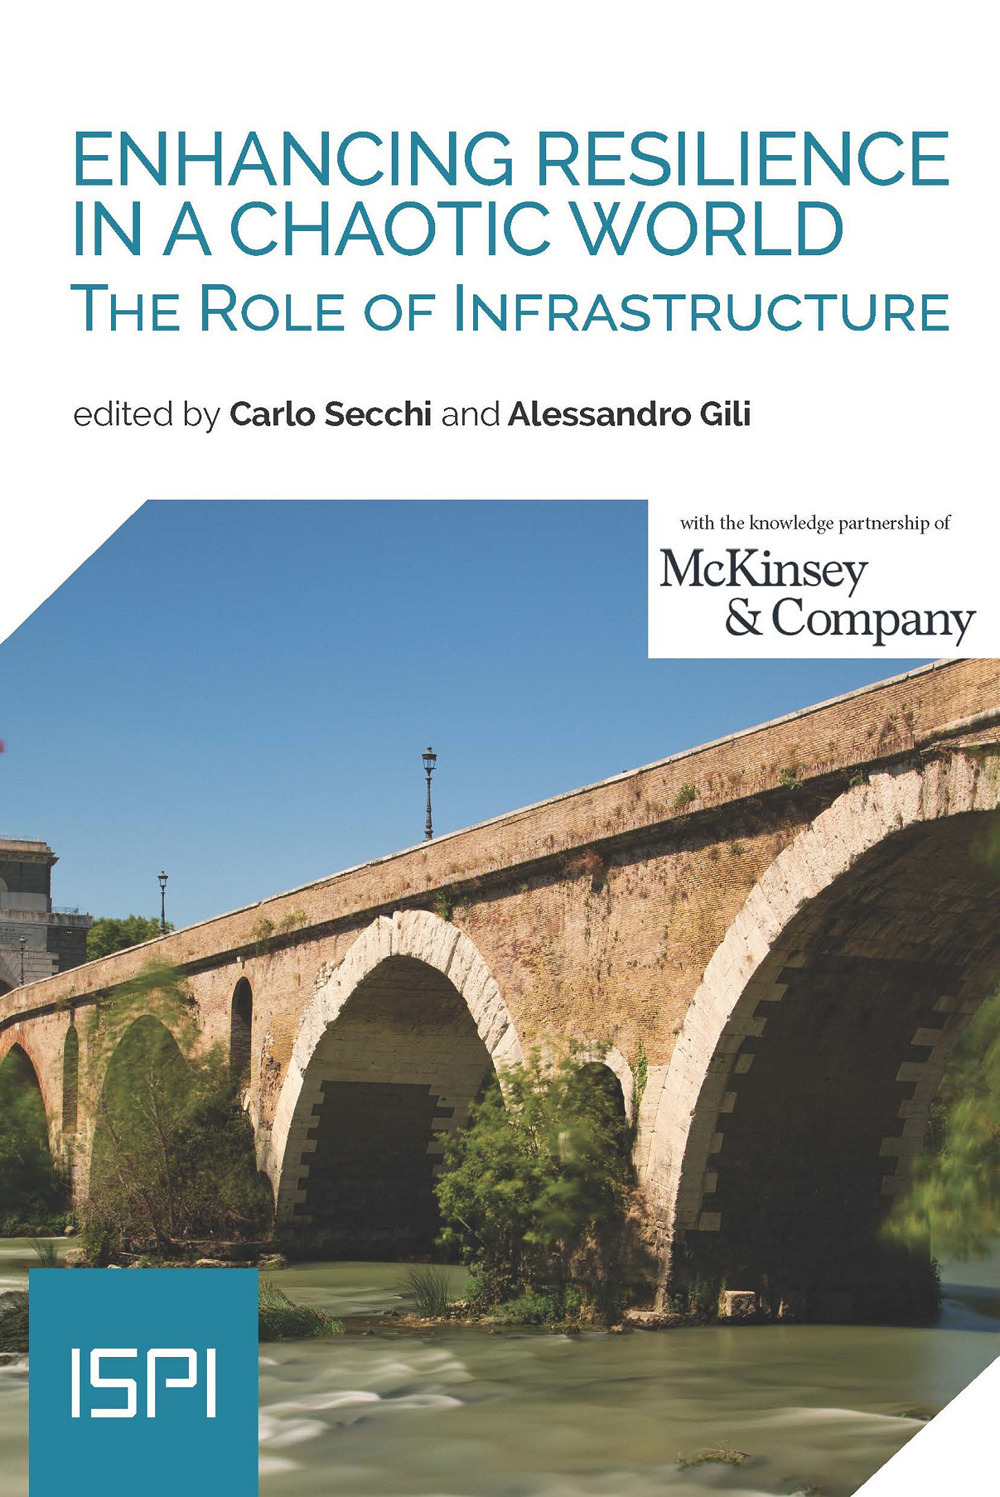 Enhancing resilience in a chaotic world. The role of infrastructure